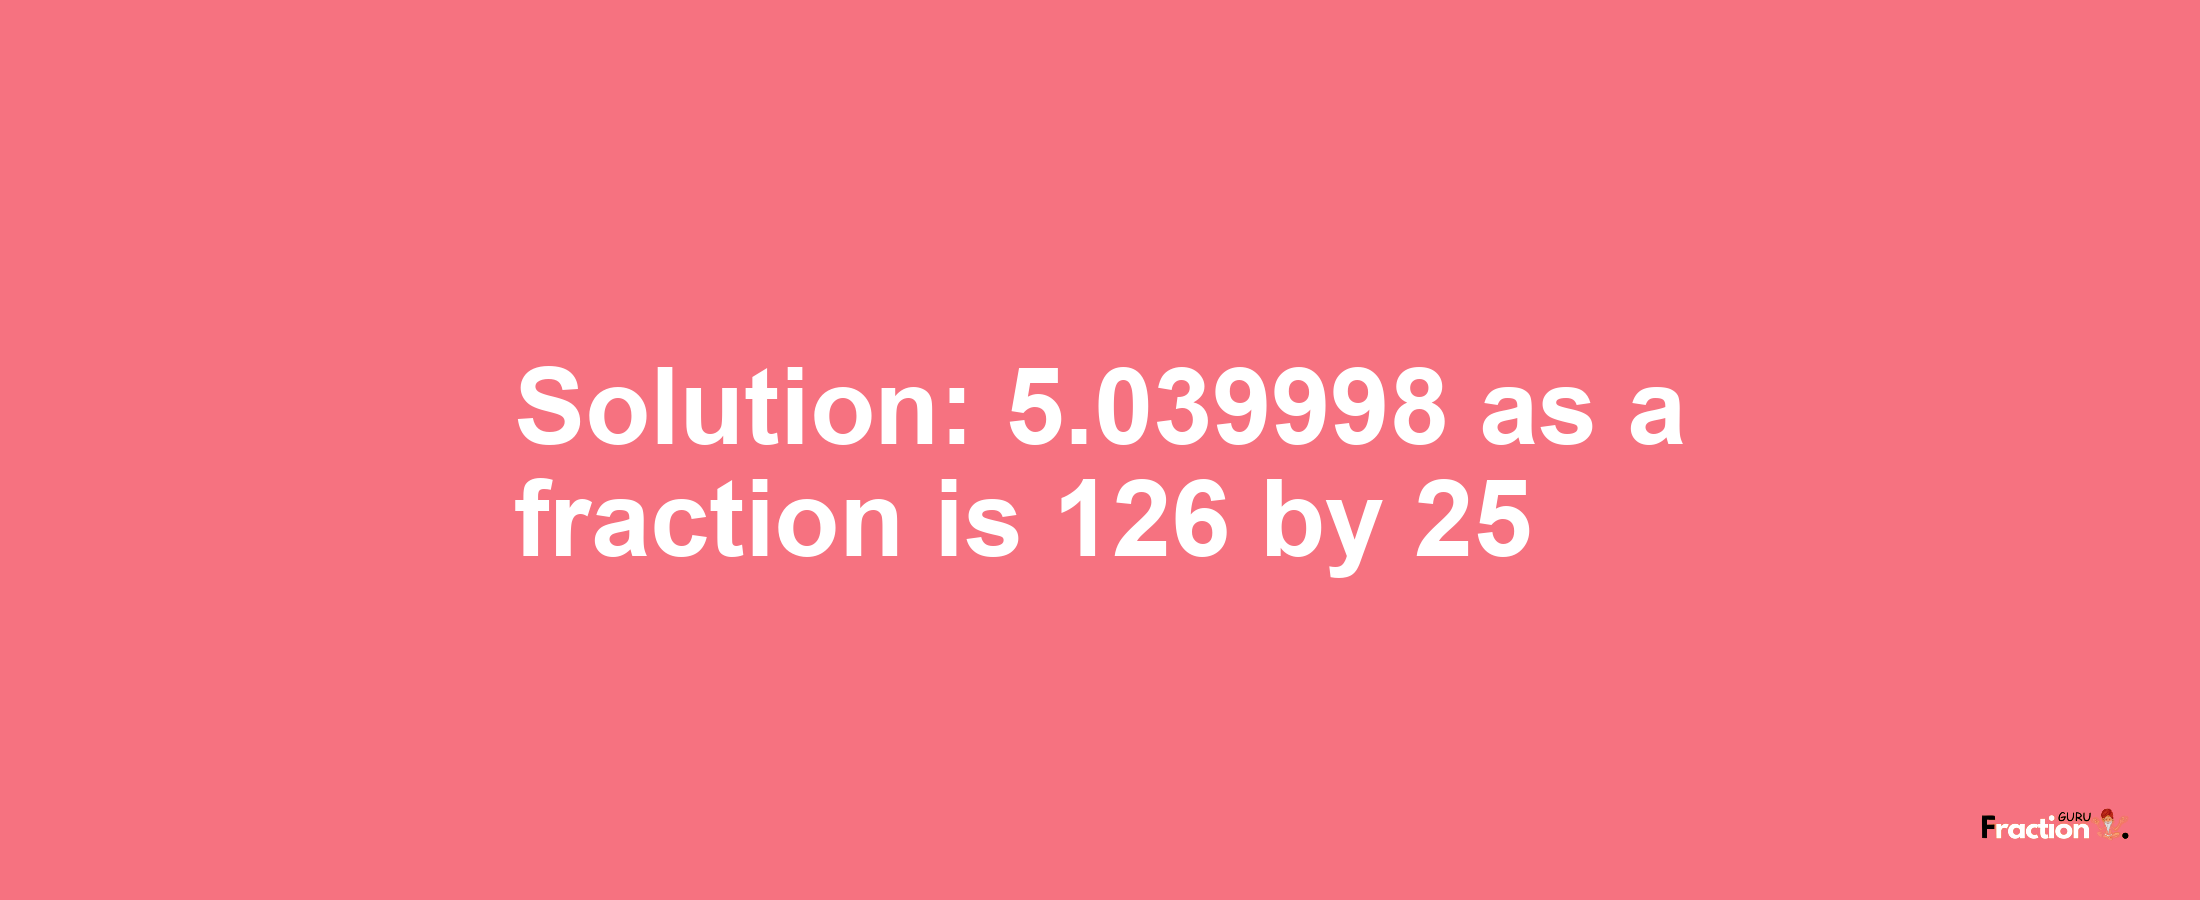 Solution:5.039998 as a fraction is 126/25